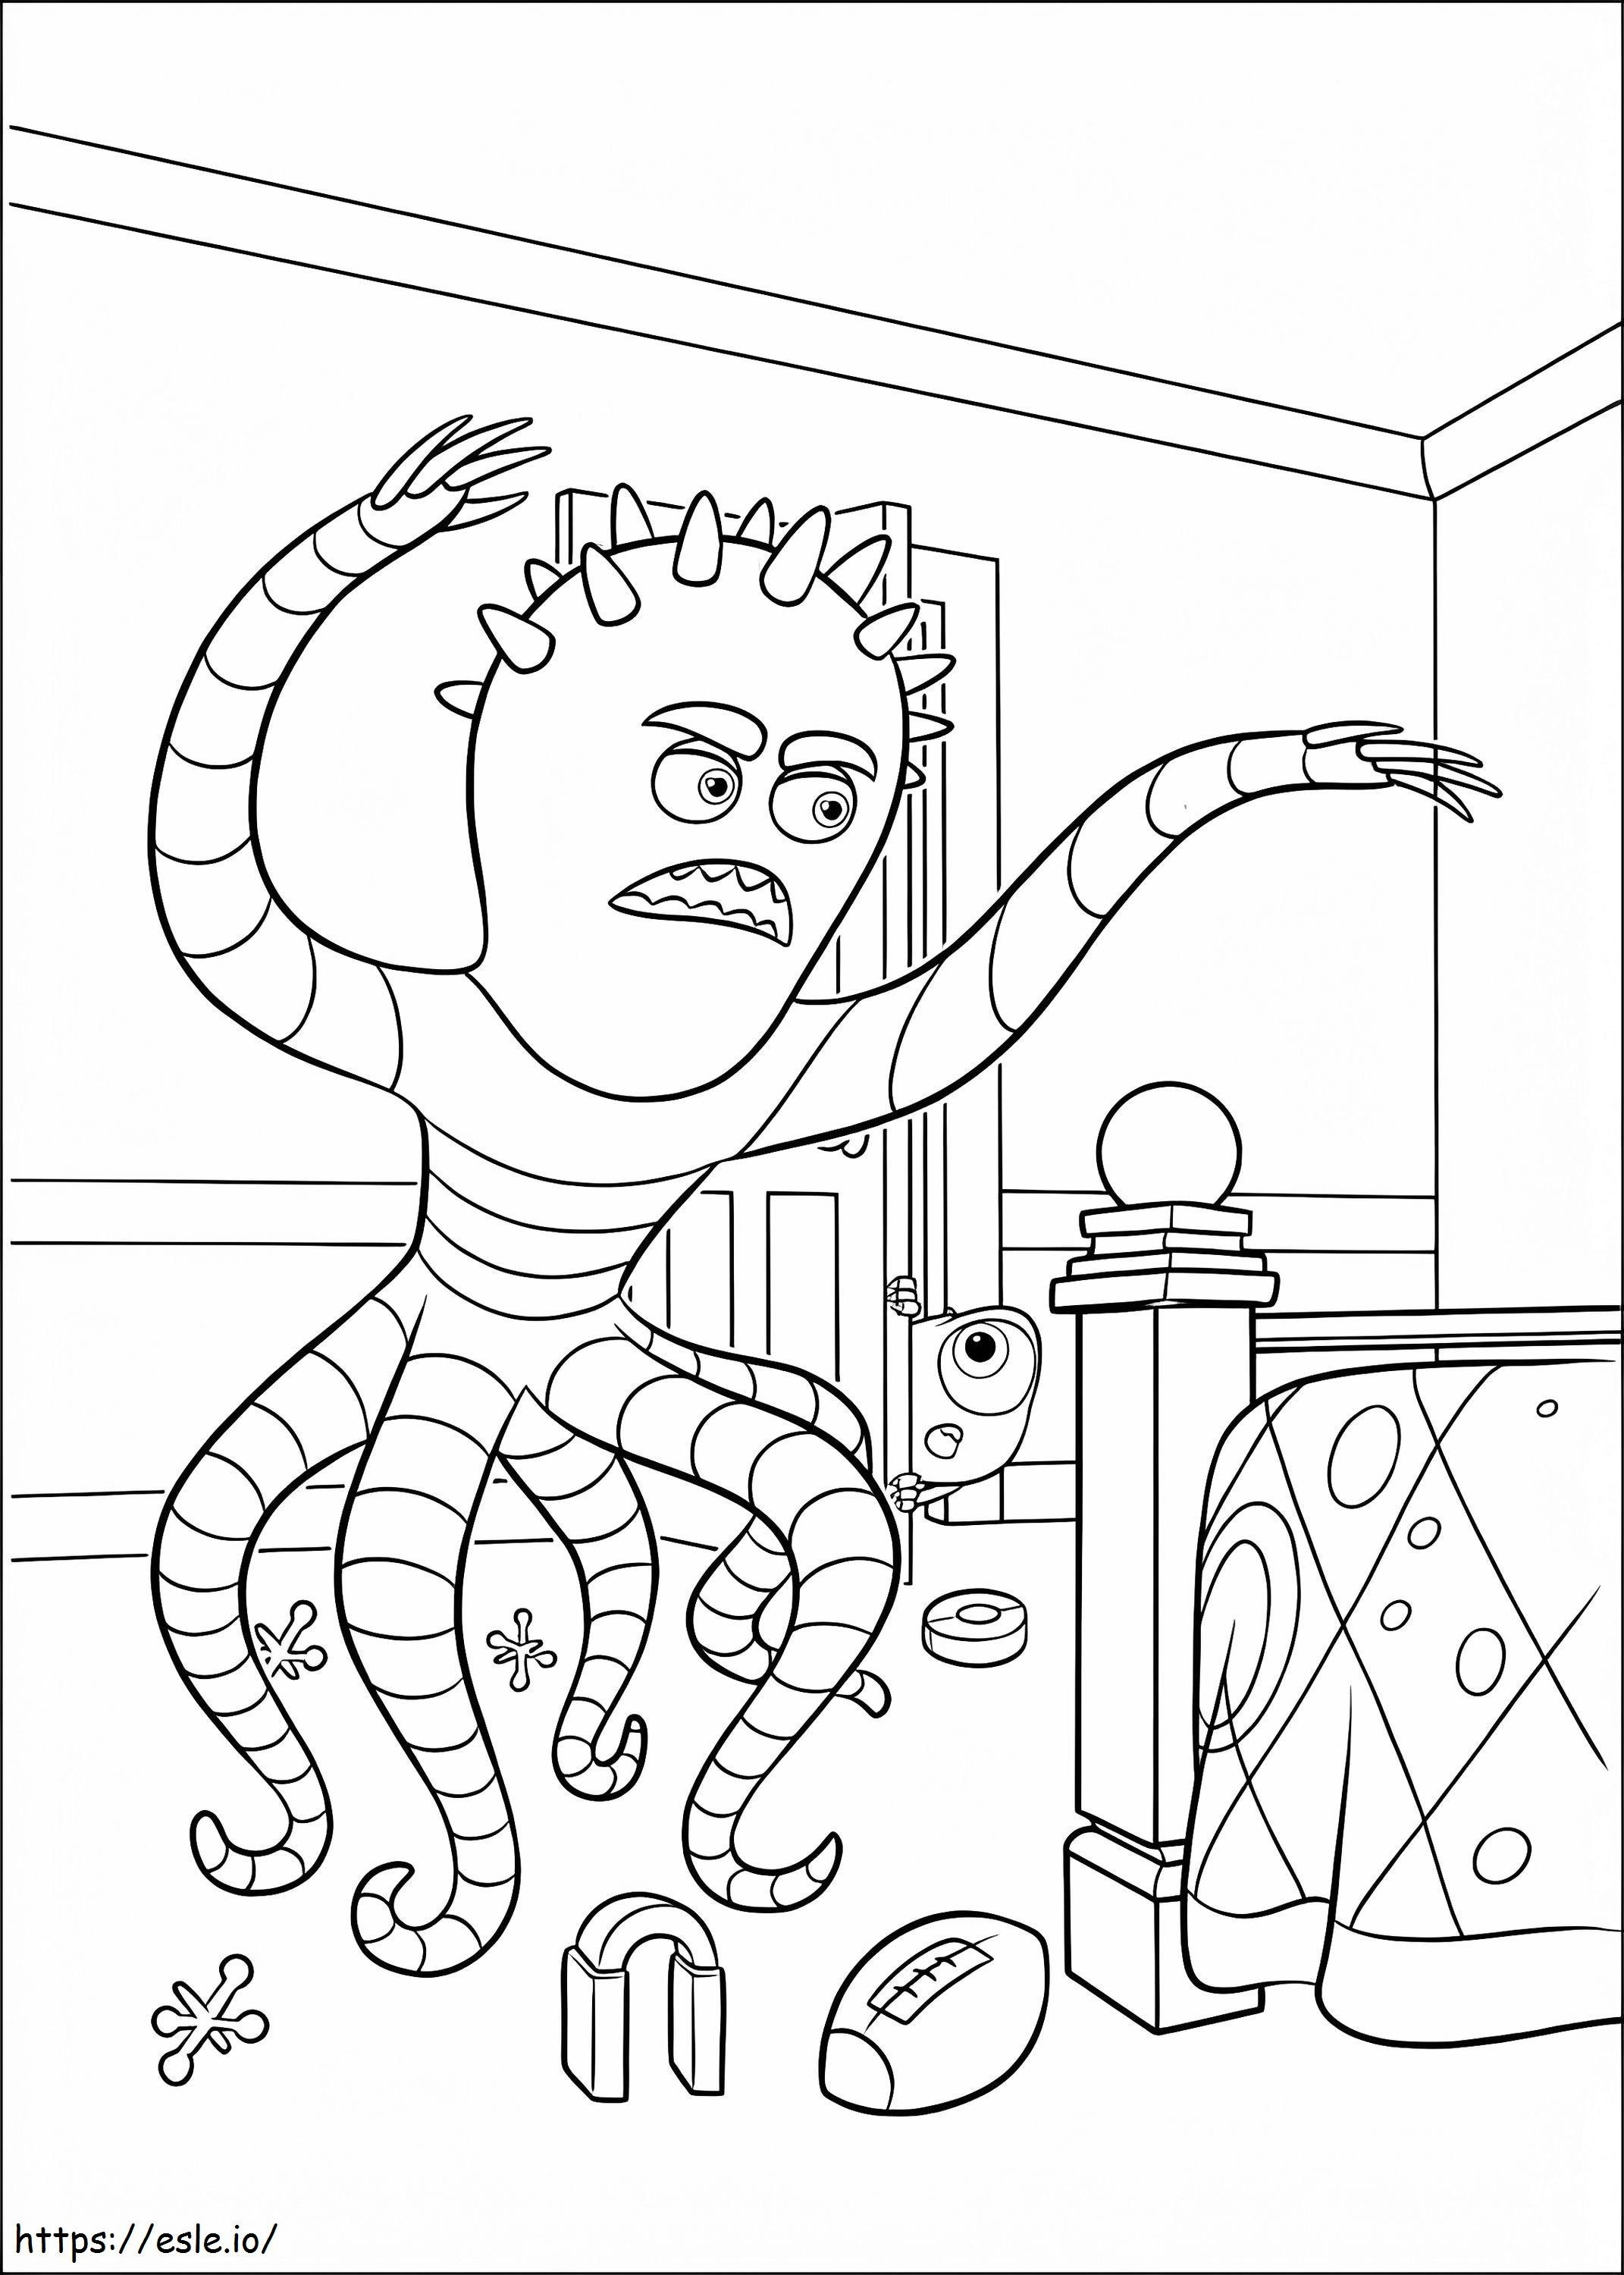 Monsters University 3 coloring page